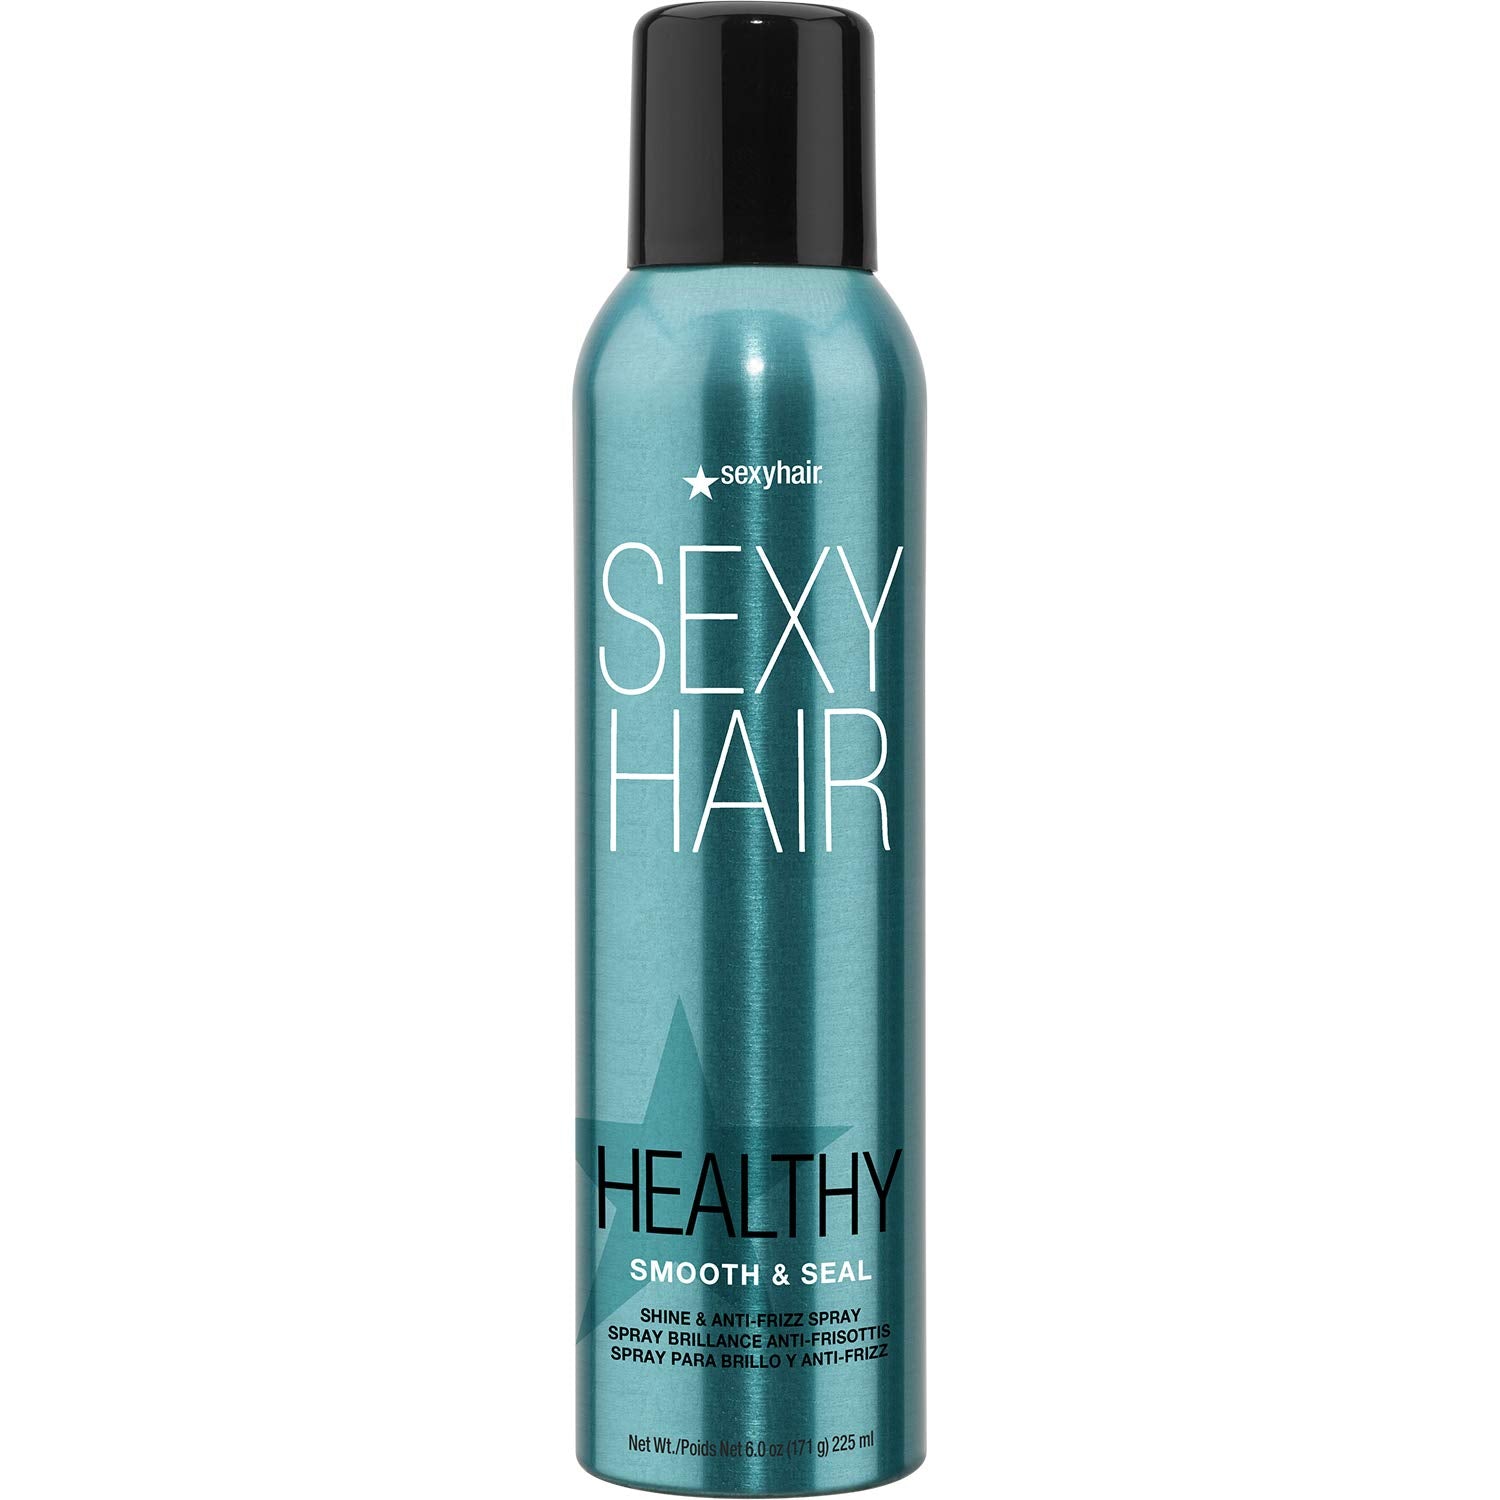 SexyHair Healthy Smooth and Seal Shine and Anti-Frizz Spray - 6 oz (Buy 3 Get 1 Free Mix & Match)